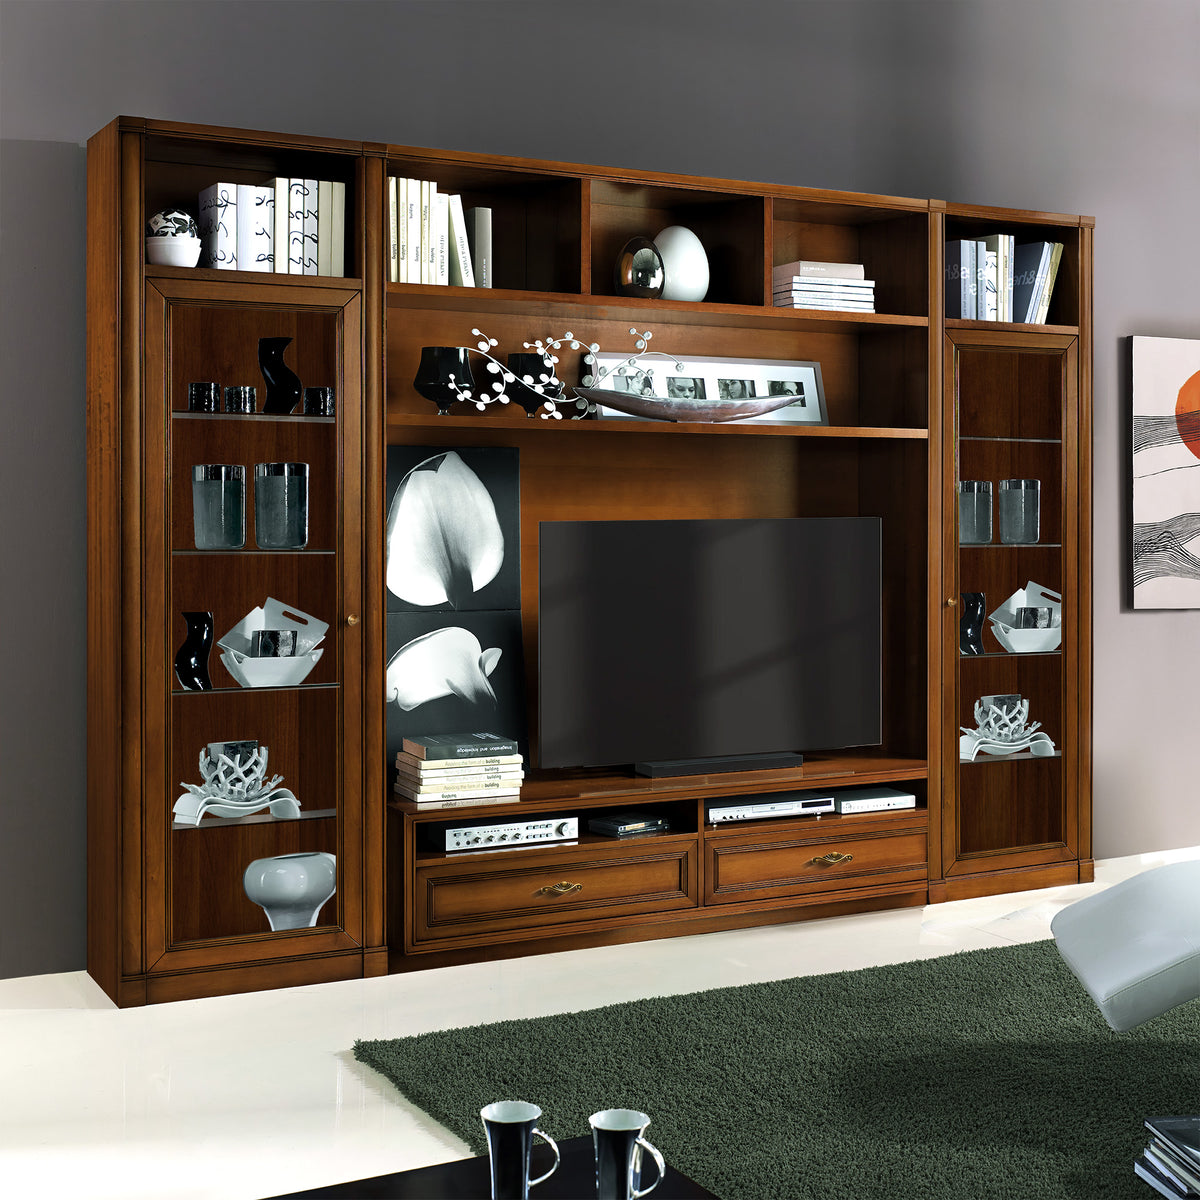 Mobile Wall for Classic Living Room L 325 cm in Cherry Wood Finish Arte D'Este Piombini Collection